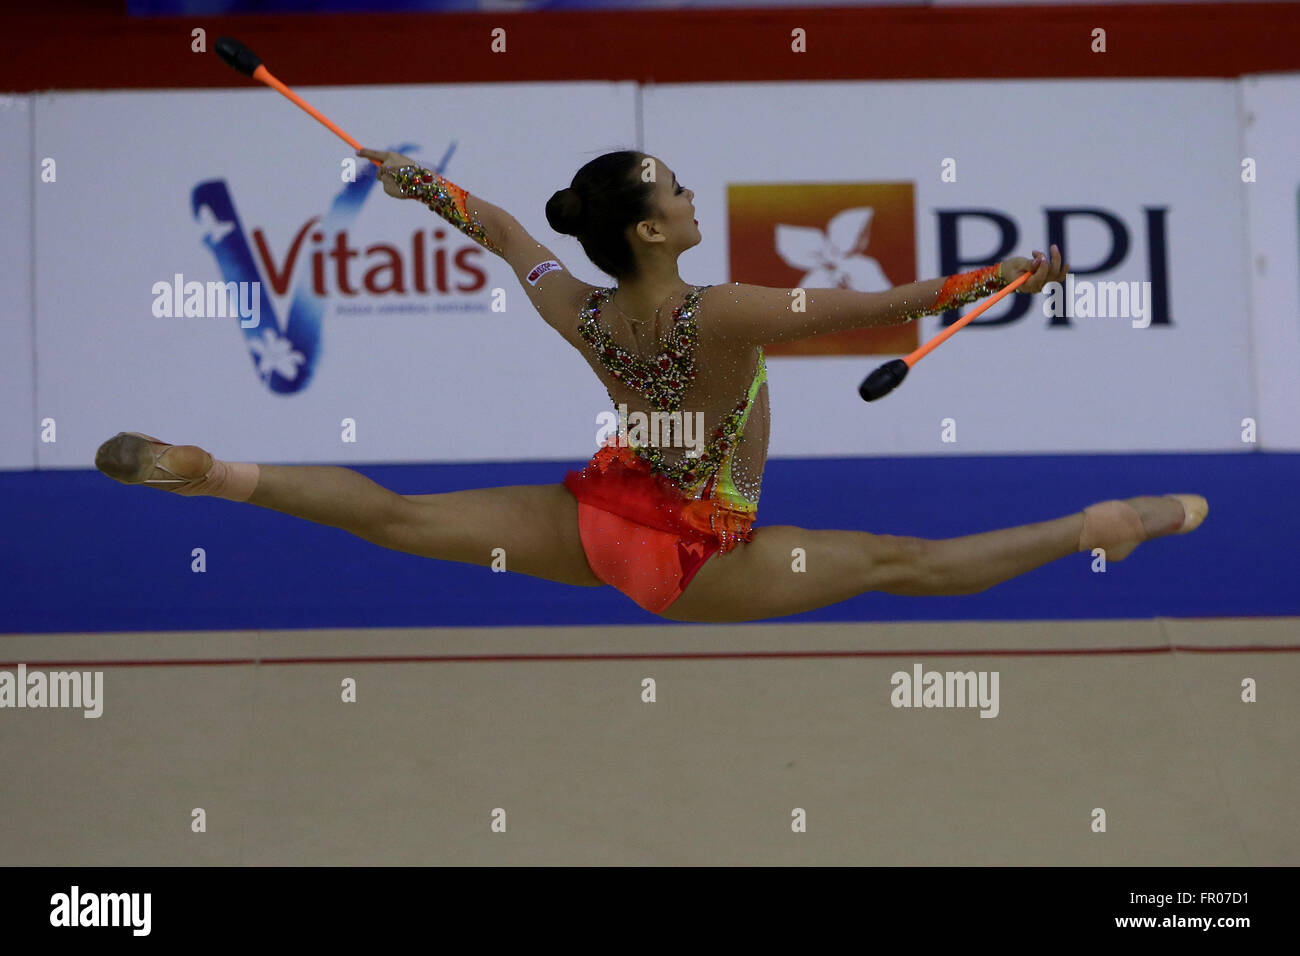 Lisbon, Portugal. 20th Mar, 2016. Second placed Yeon Jae Son of Korea performs with the hoop during the final of the FIG Rhythmic Gymnastics World Cup in Lisbon, Portugal on March 20, 2016. © Pedro Fiuza/ZUMA Wire/Alamy Live News Stock Photo